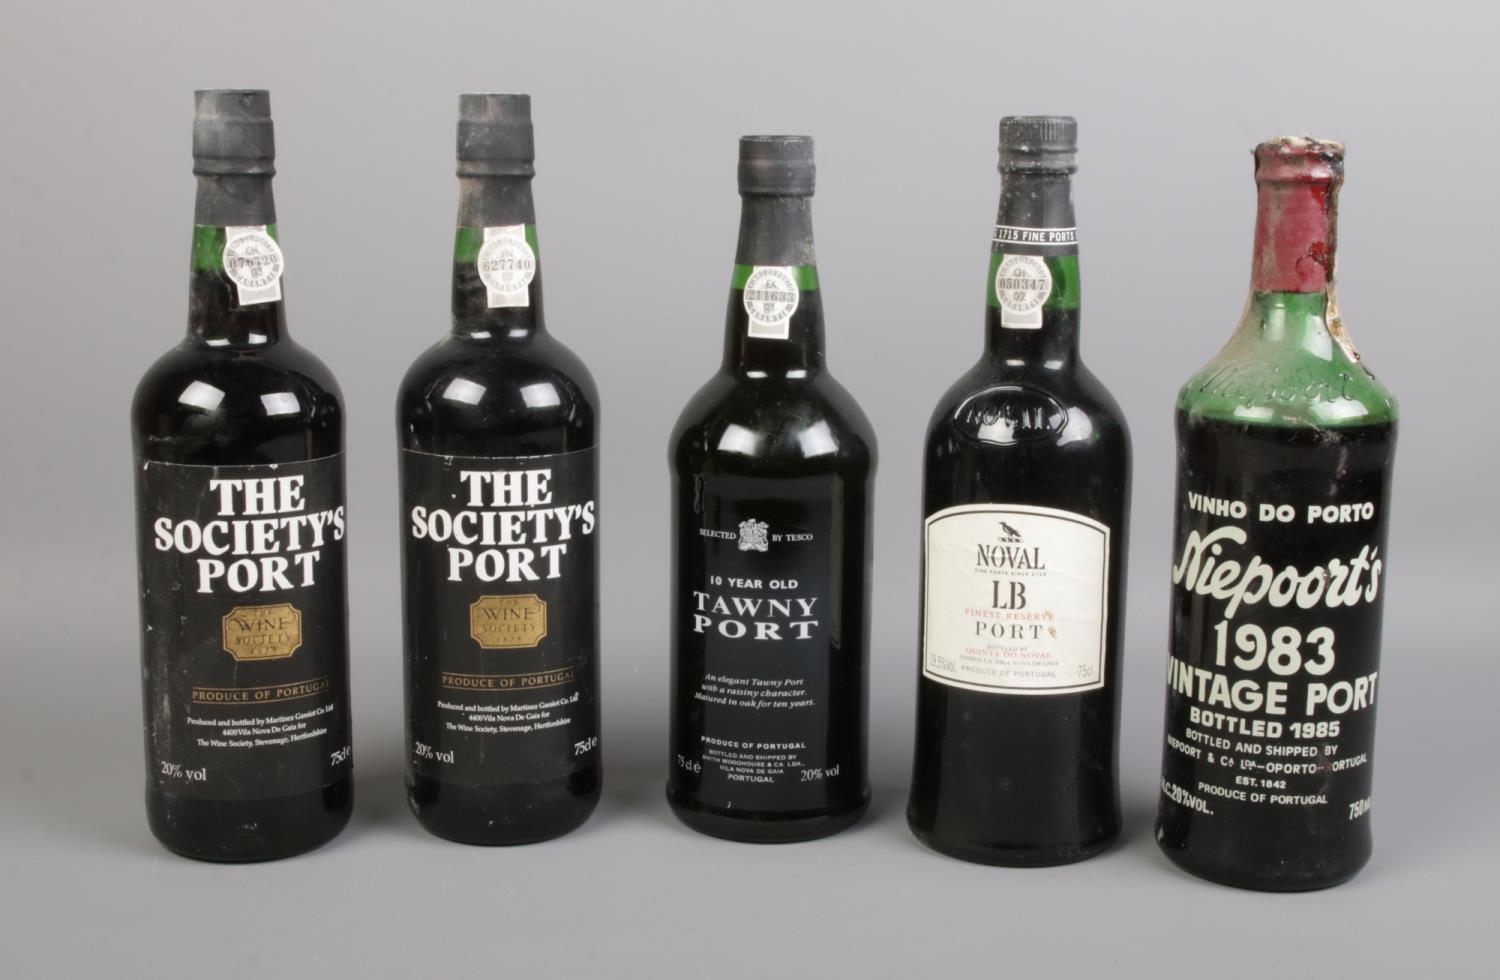 Five bottles of alcohol. To include two bottles of The Society's Port, Noval LB Port, and 10 year